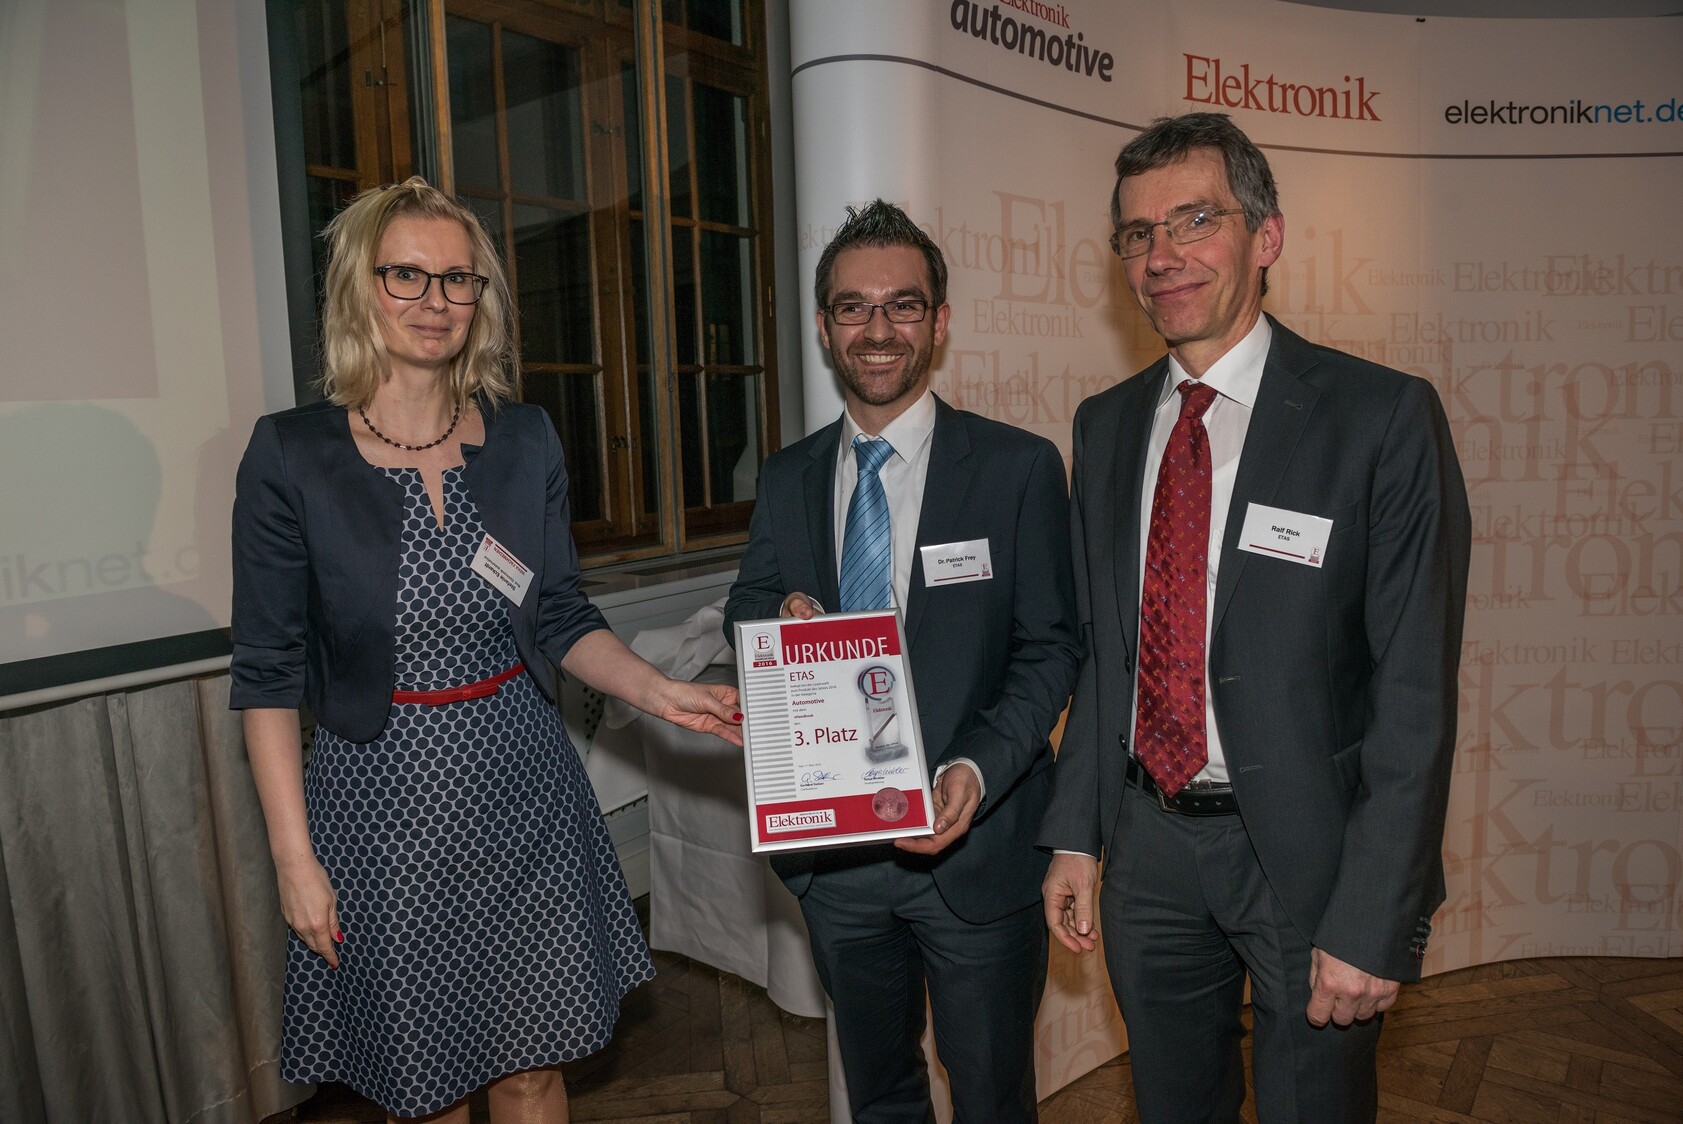 Me and my colleague Ralf Rick receiving the "Product-of-the-year-award" by Automotive Elektronik